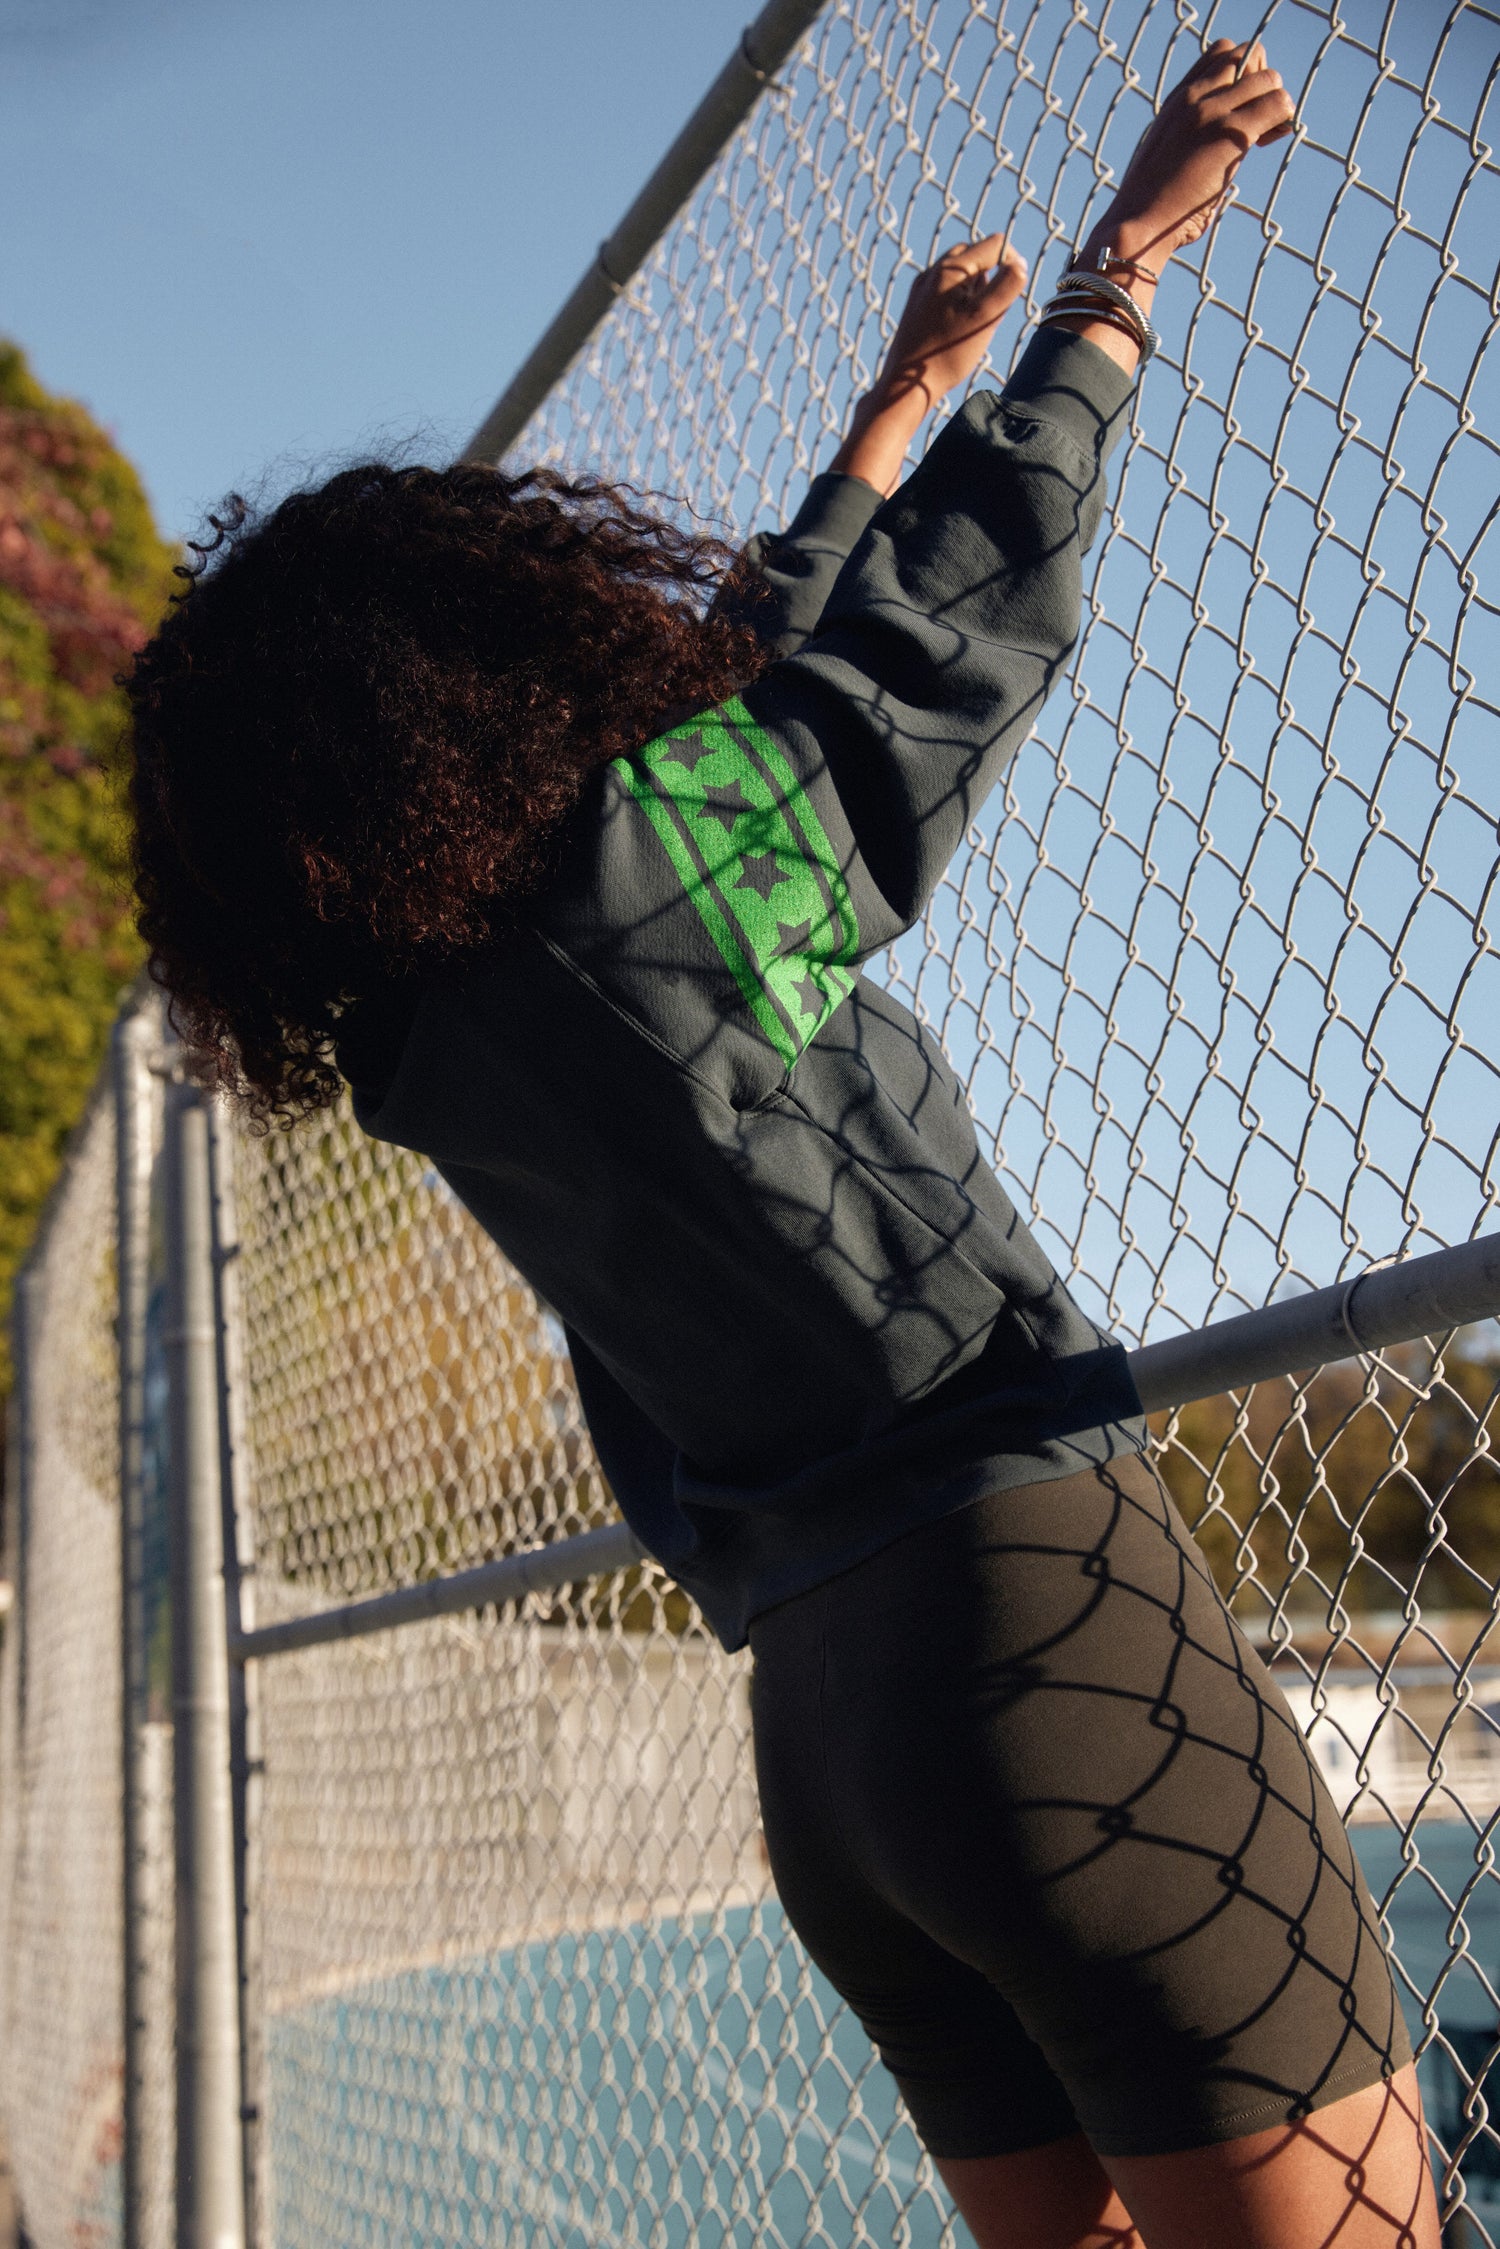 A model featuring a black sweatshirt designed with a  large star in the middle, stamped with "Lucky Star" and green stripes on the sleeves.